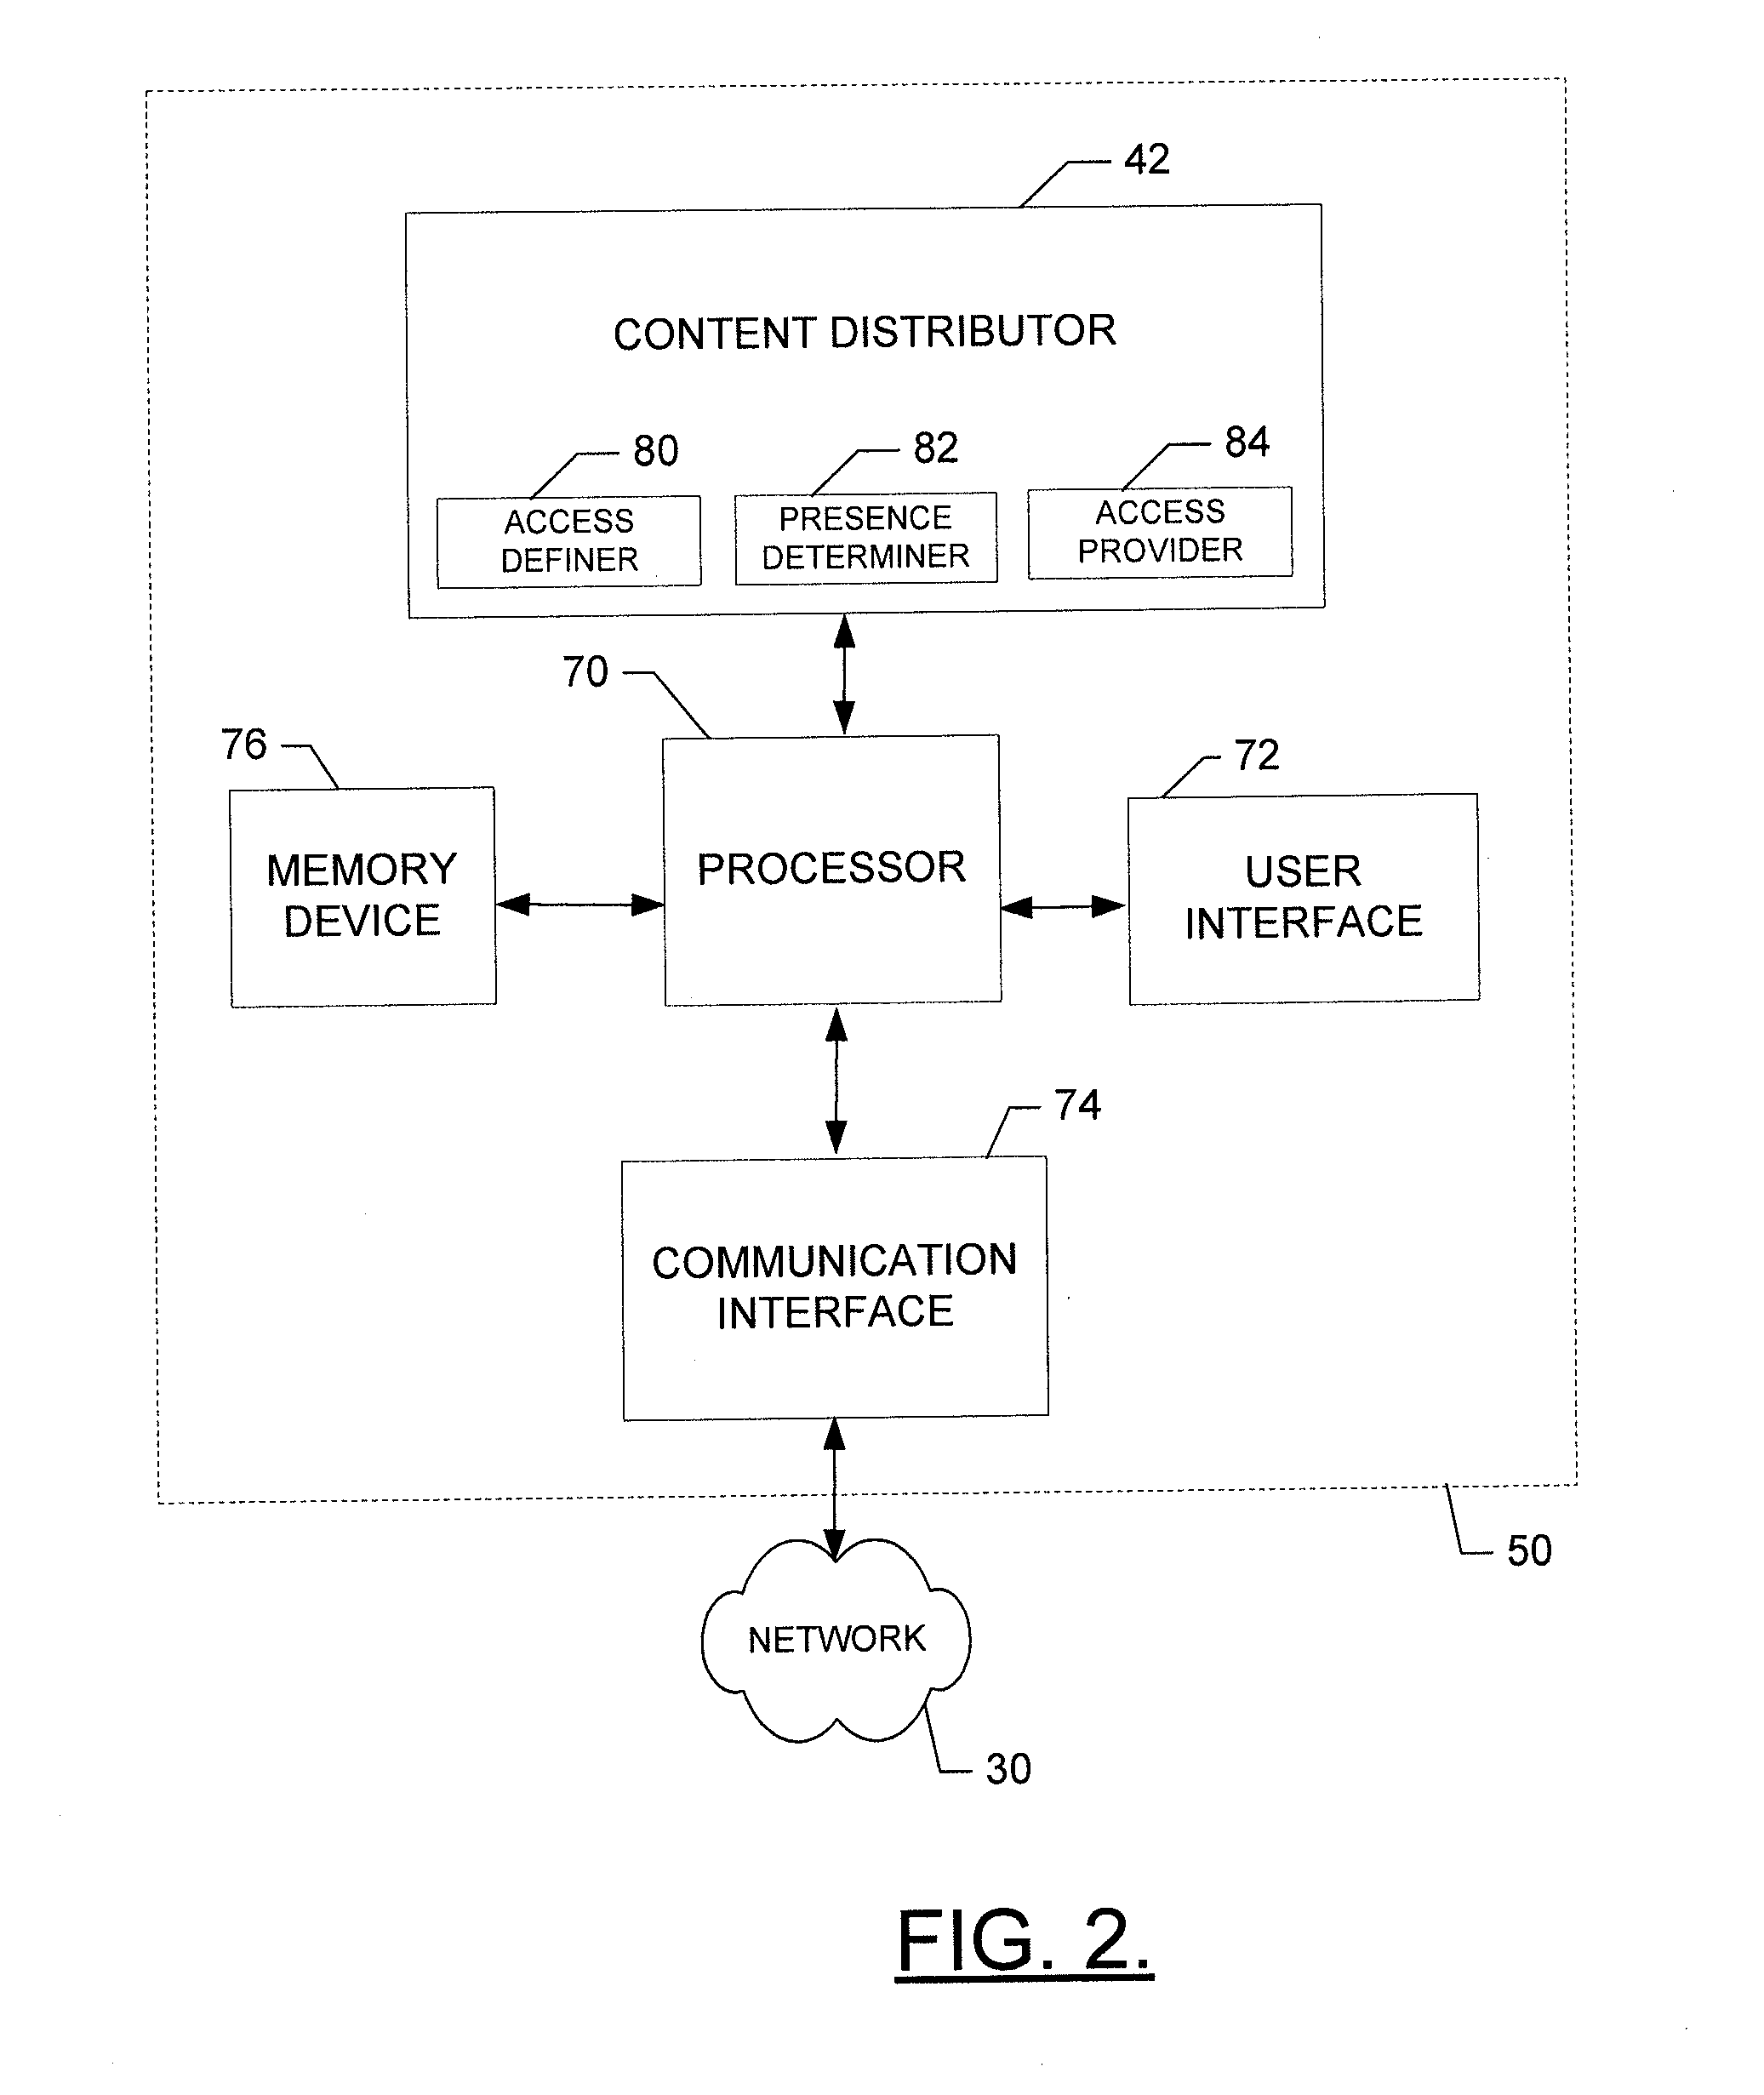 Method and apparatus for providing access to social content based on membership activity